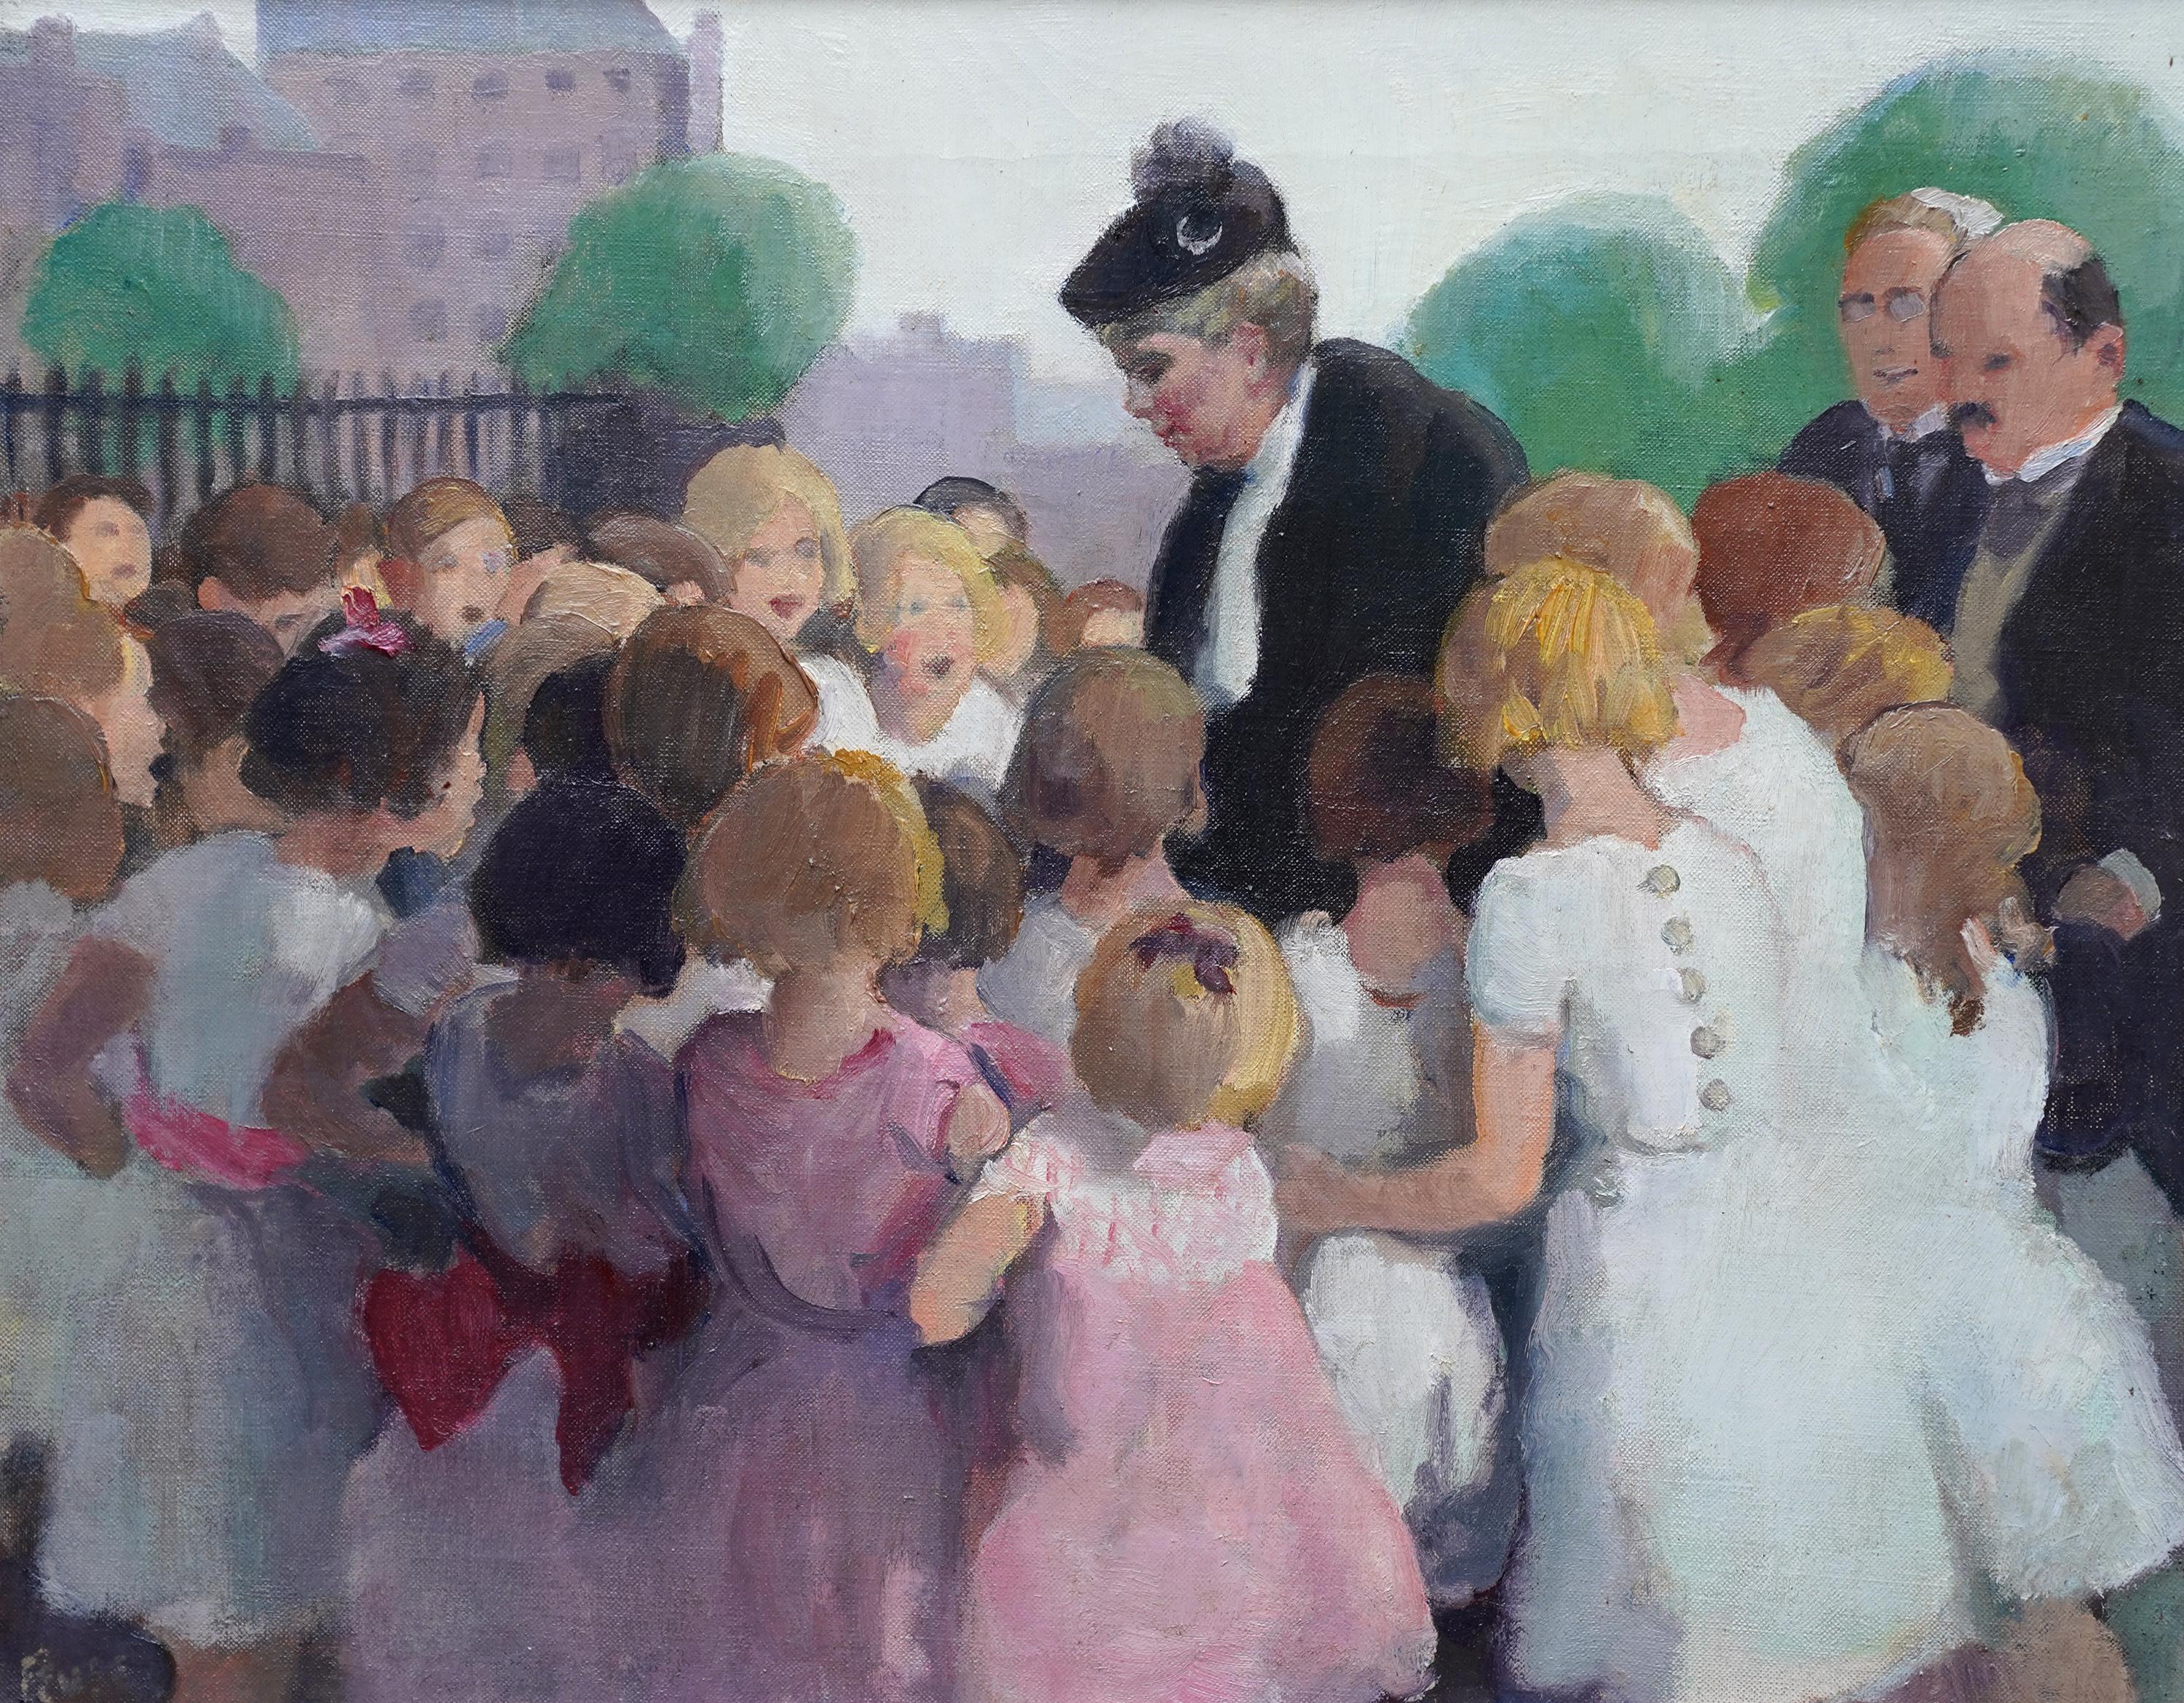 Queen Mary Greeting School Children - British 1910 royalty portrait oil painting - Painting by Spencer Pryse